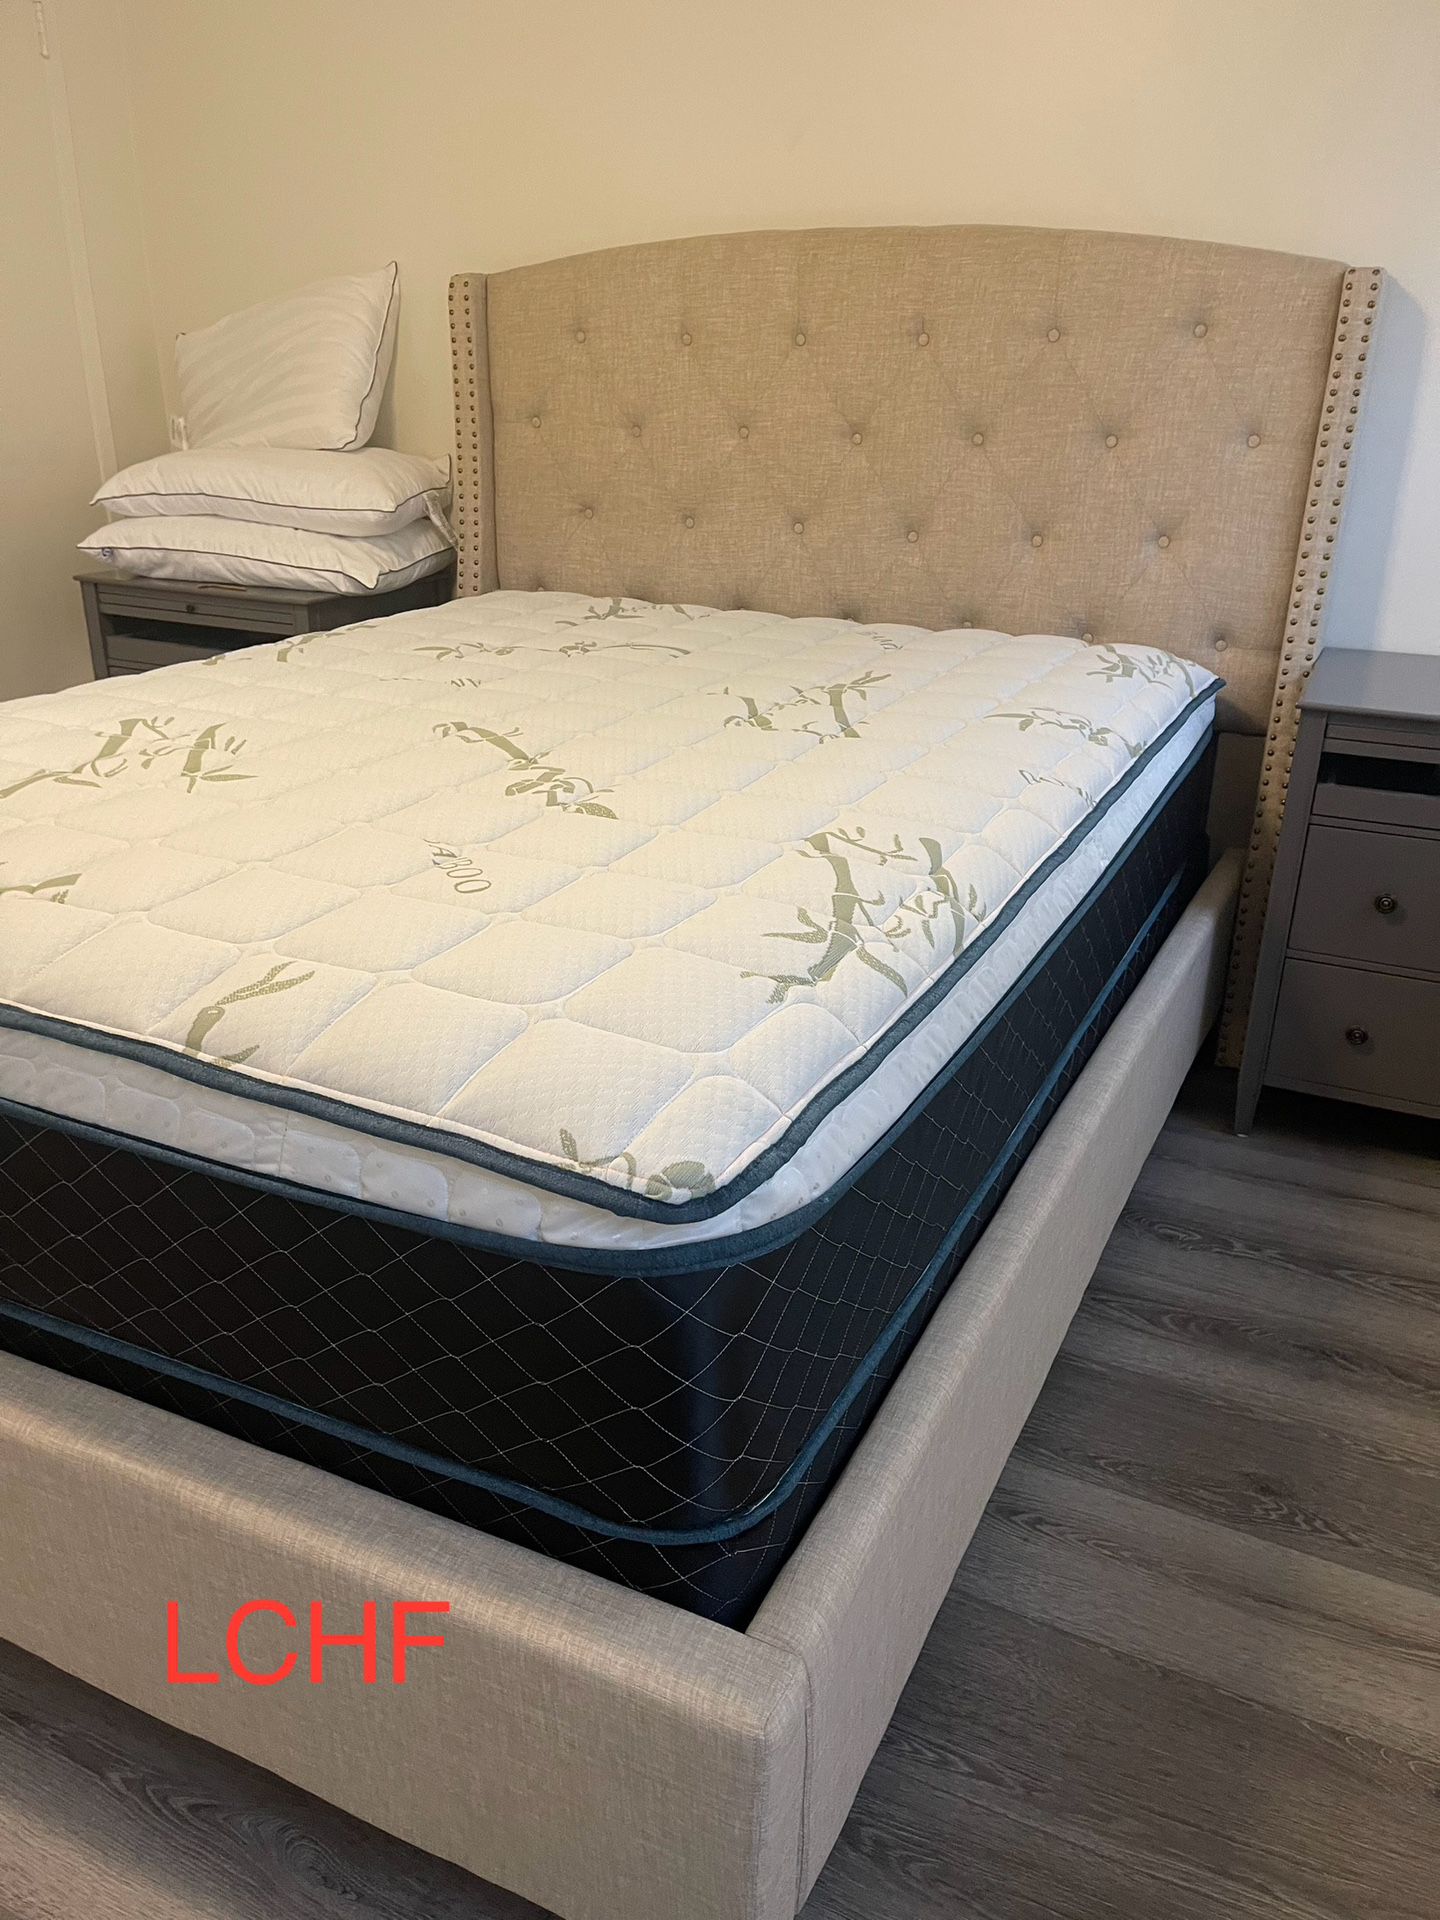 Bed And Mattress Size Queen Brand New 